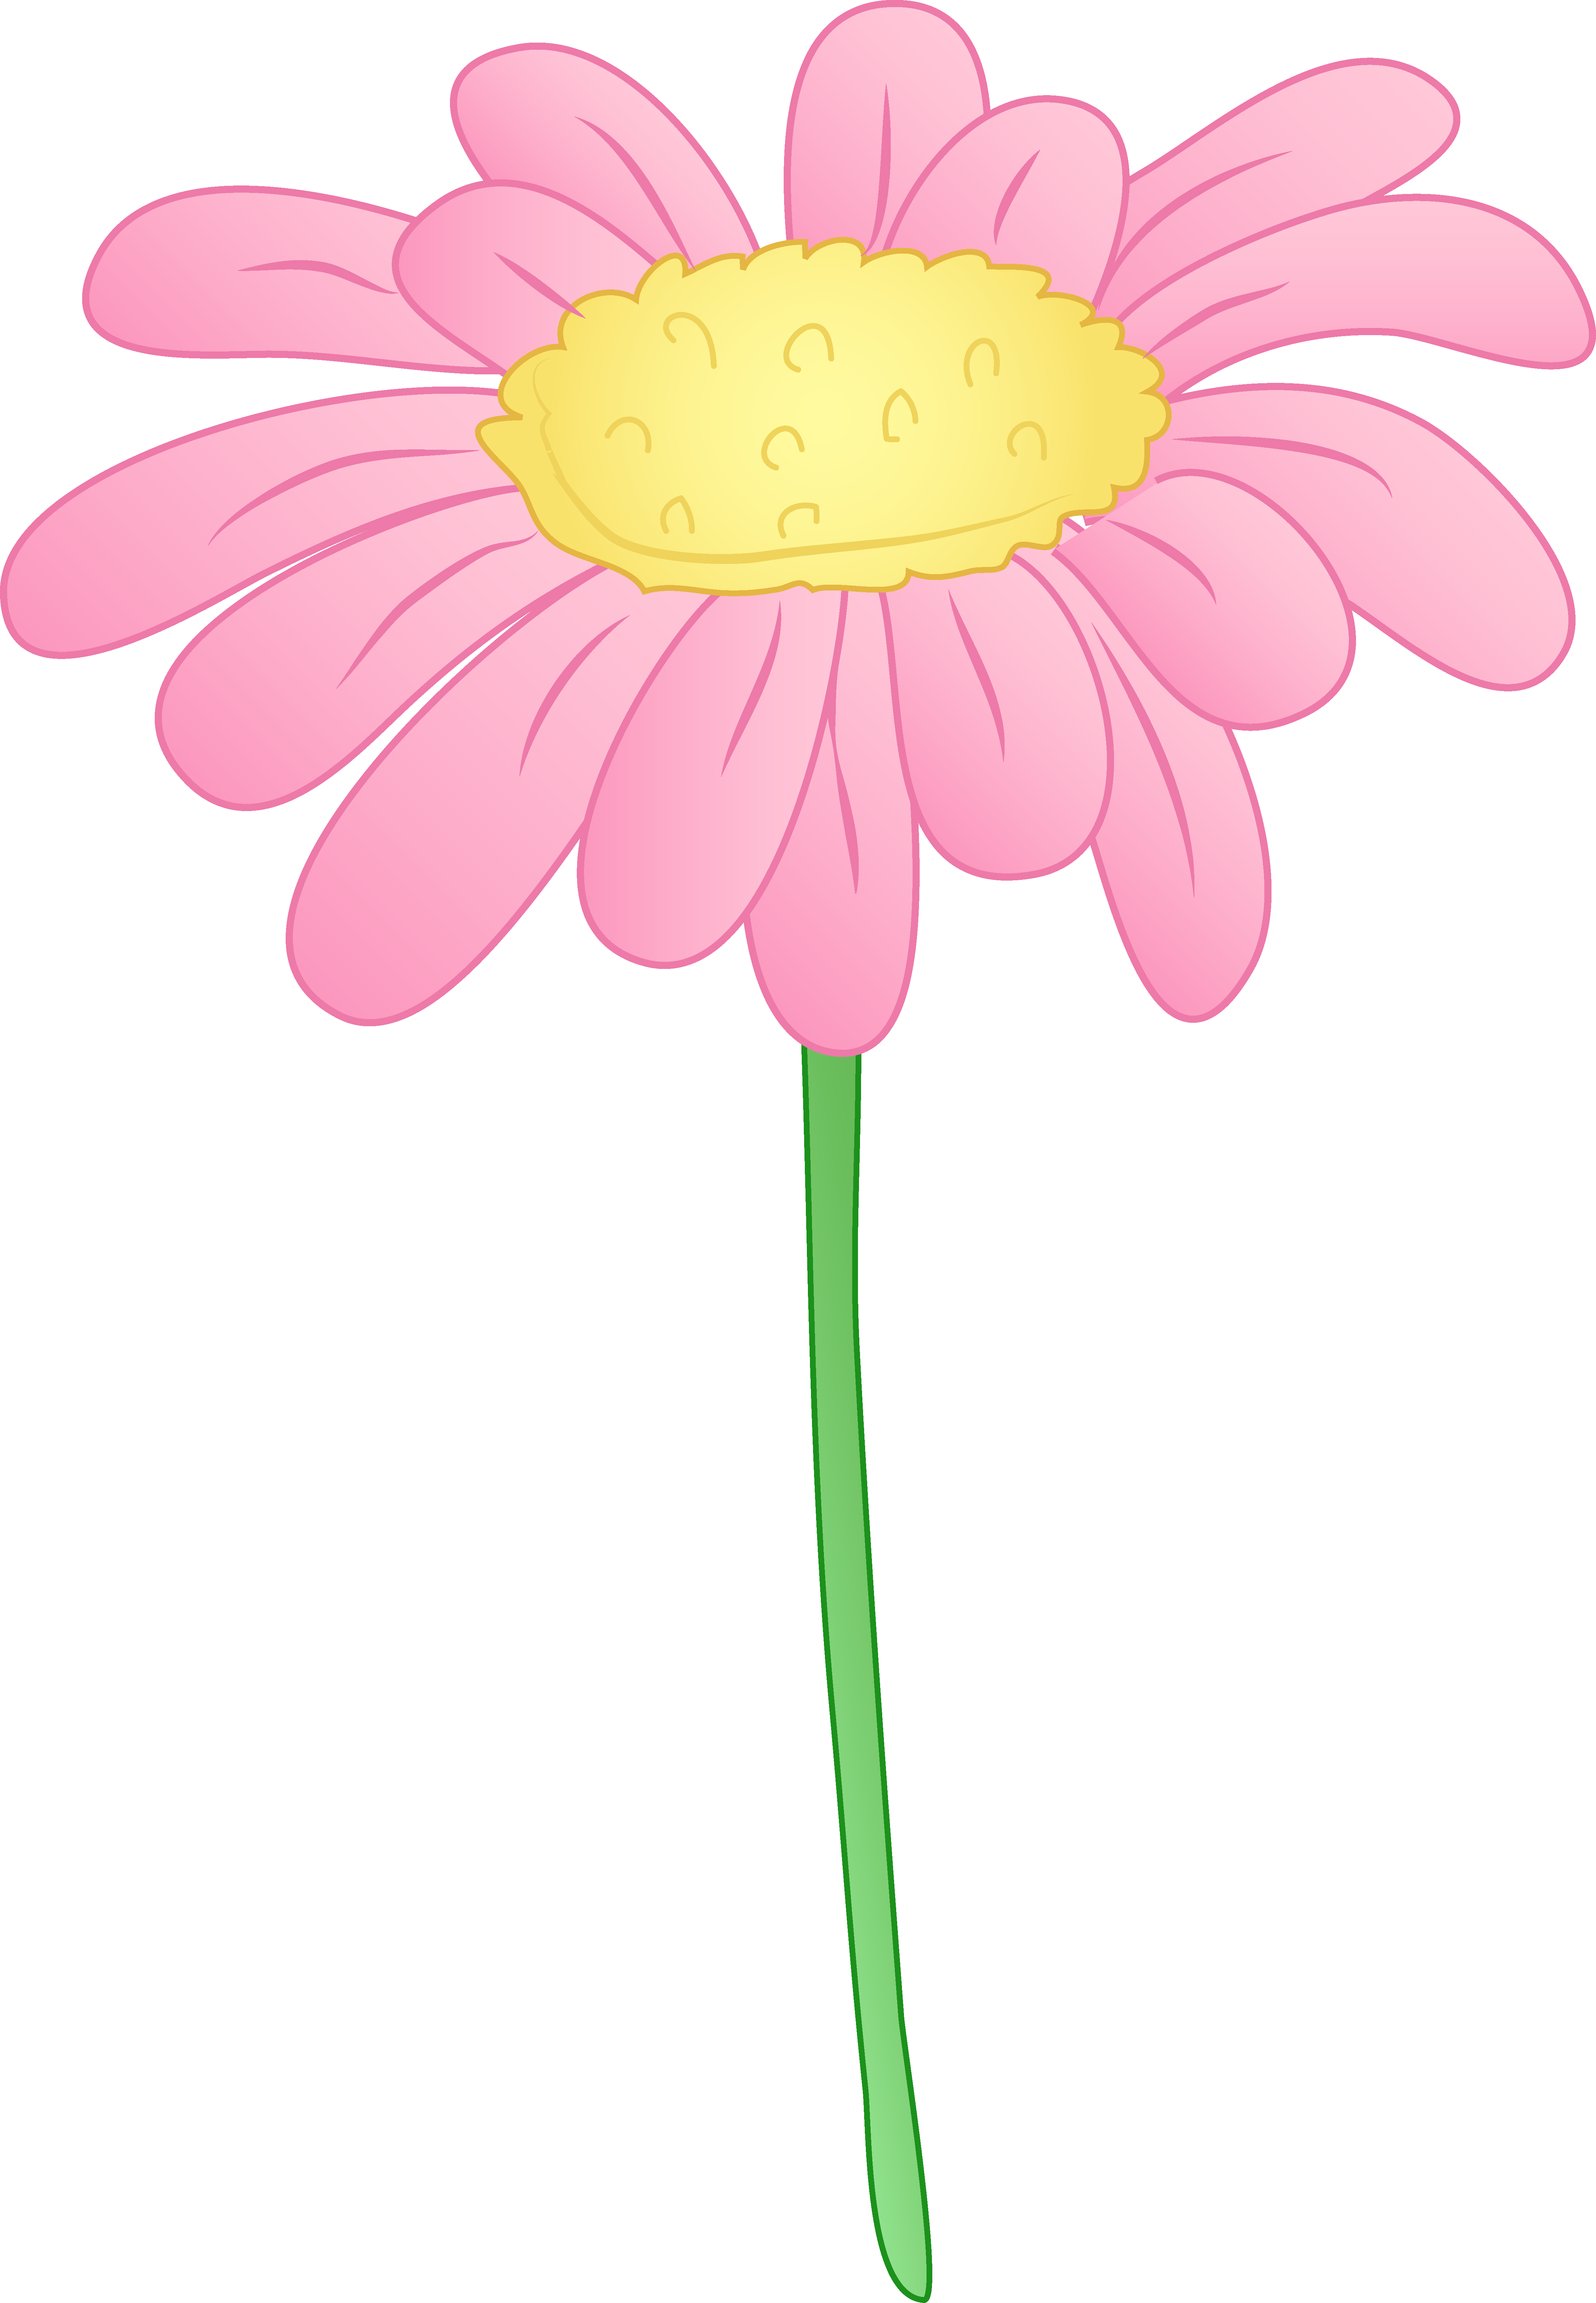 Daisy Clipart | Clipart Panda - Free Clipart Images